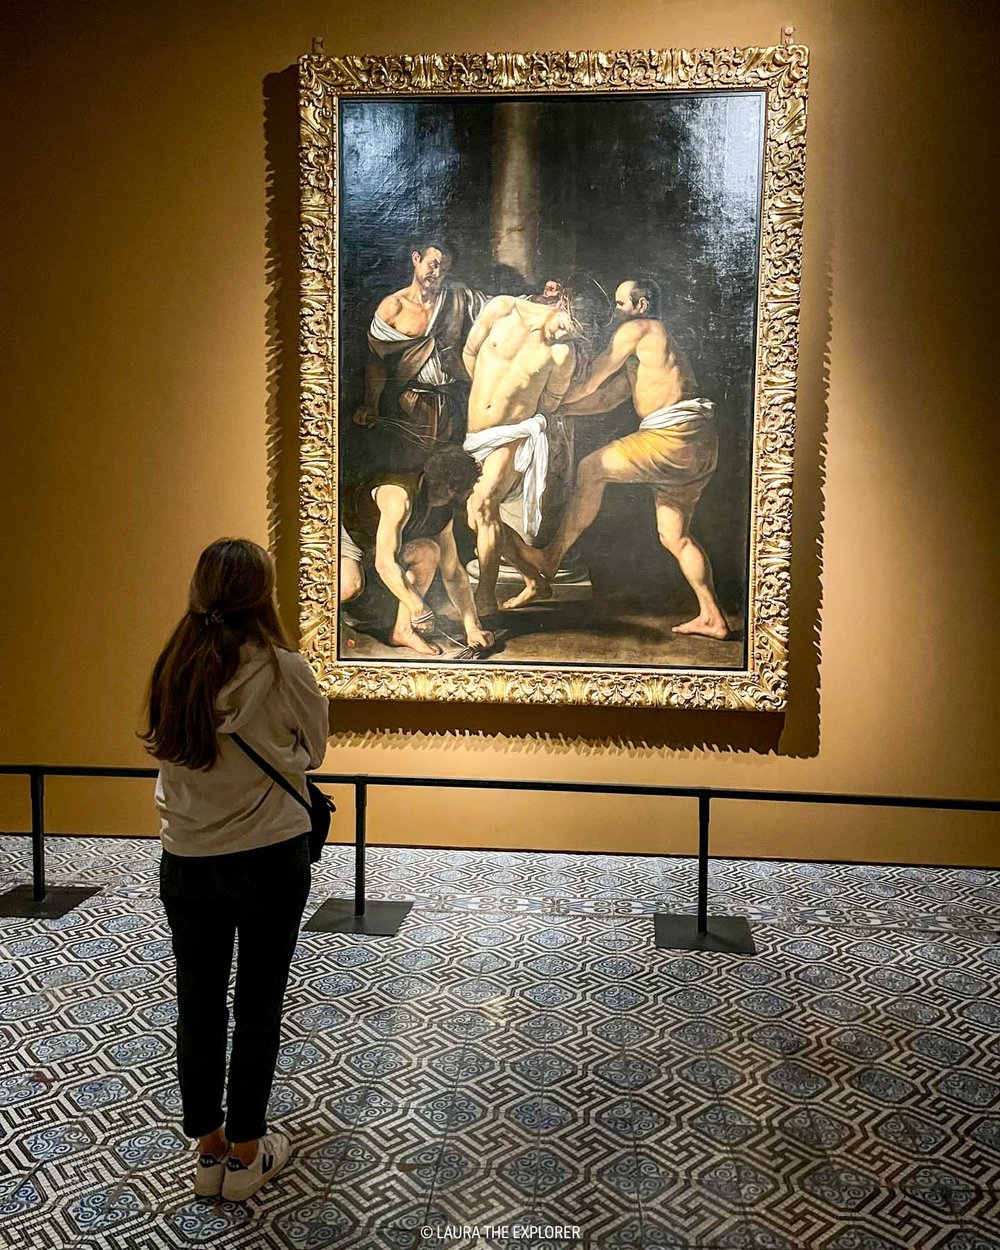 laura the explorer looking at chiarascuro artwork in the palazzo reale